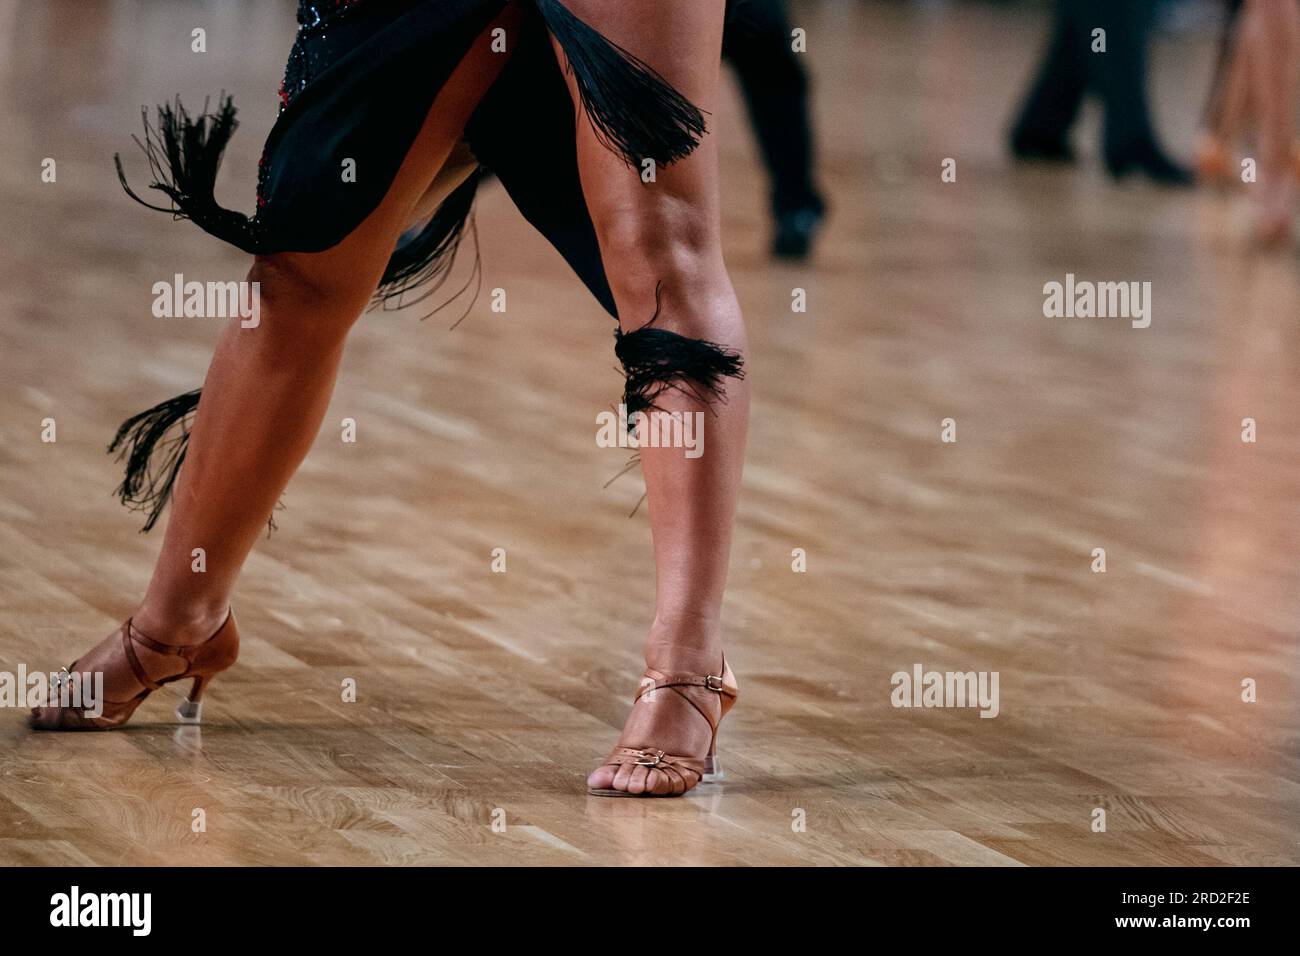 feet female dancer in brown dancing shoes, dancesport competition, pasodoble dance Stock Photo